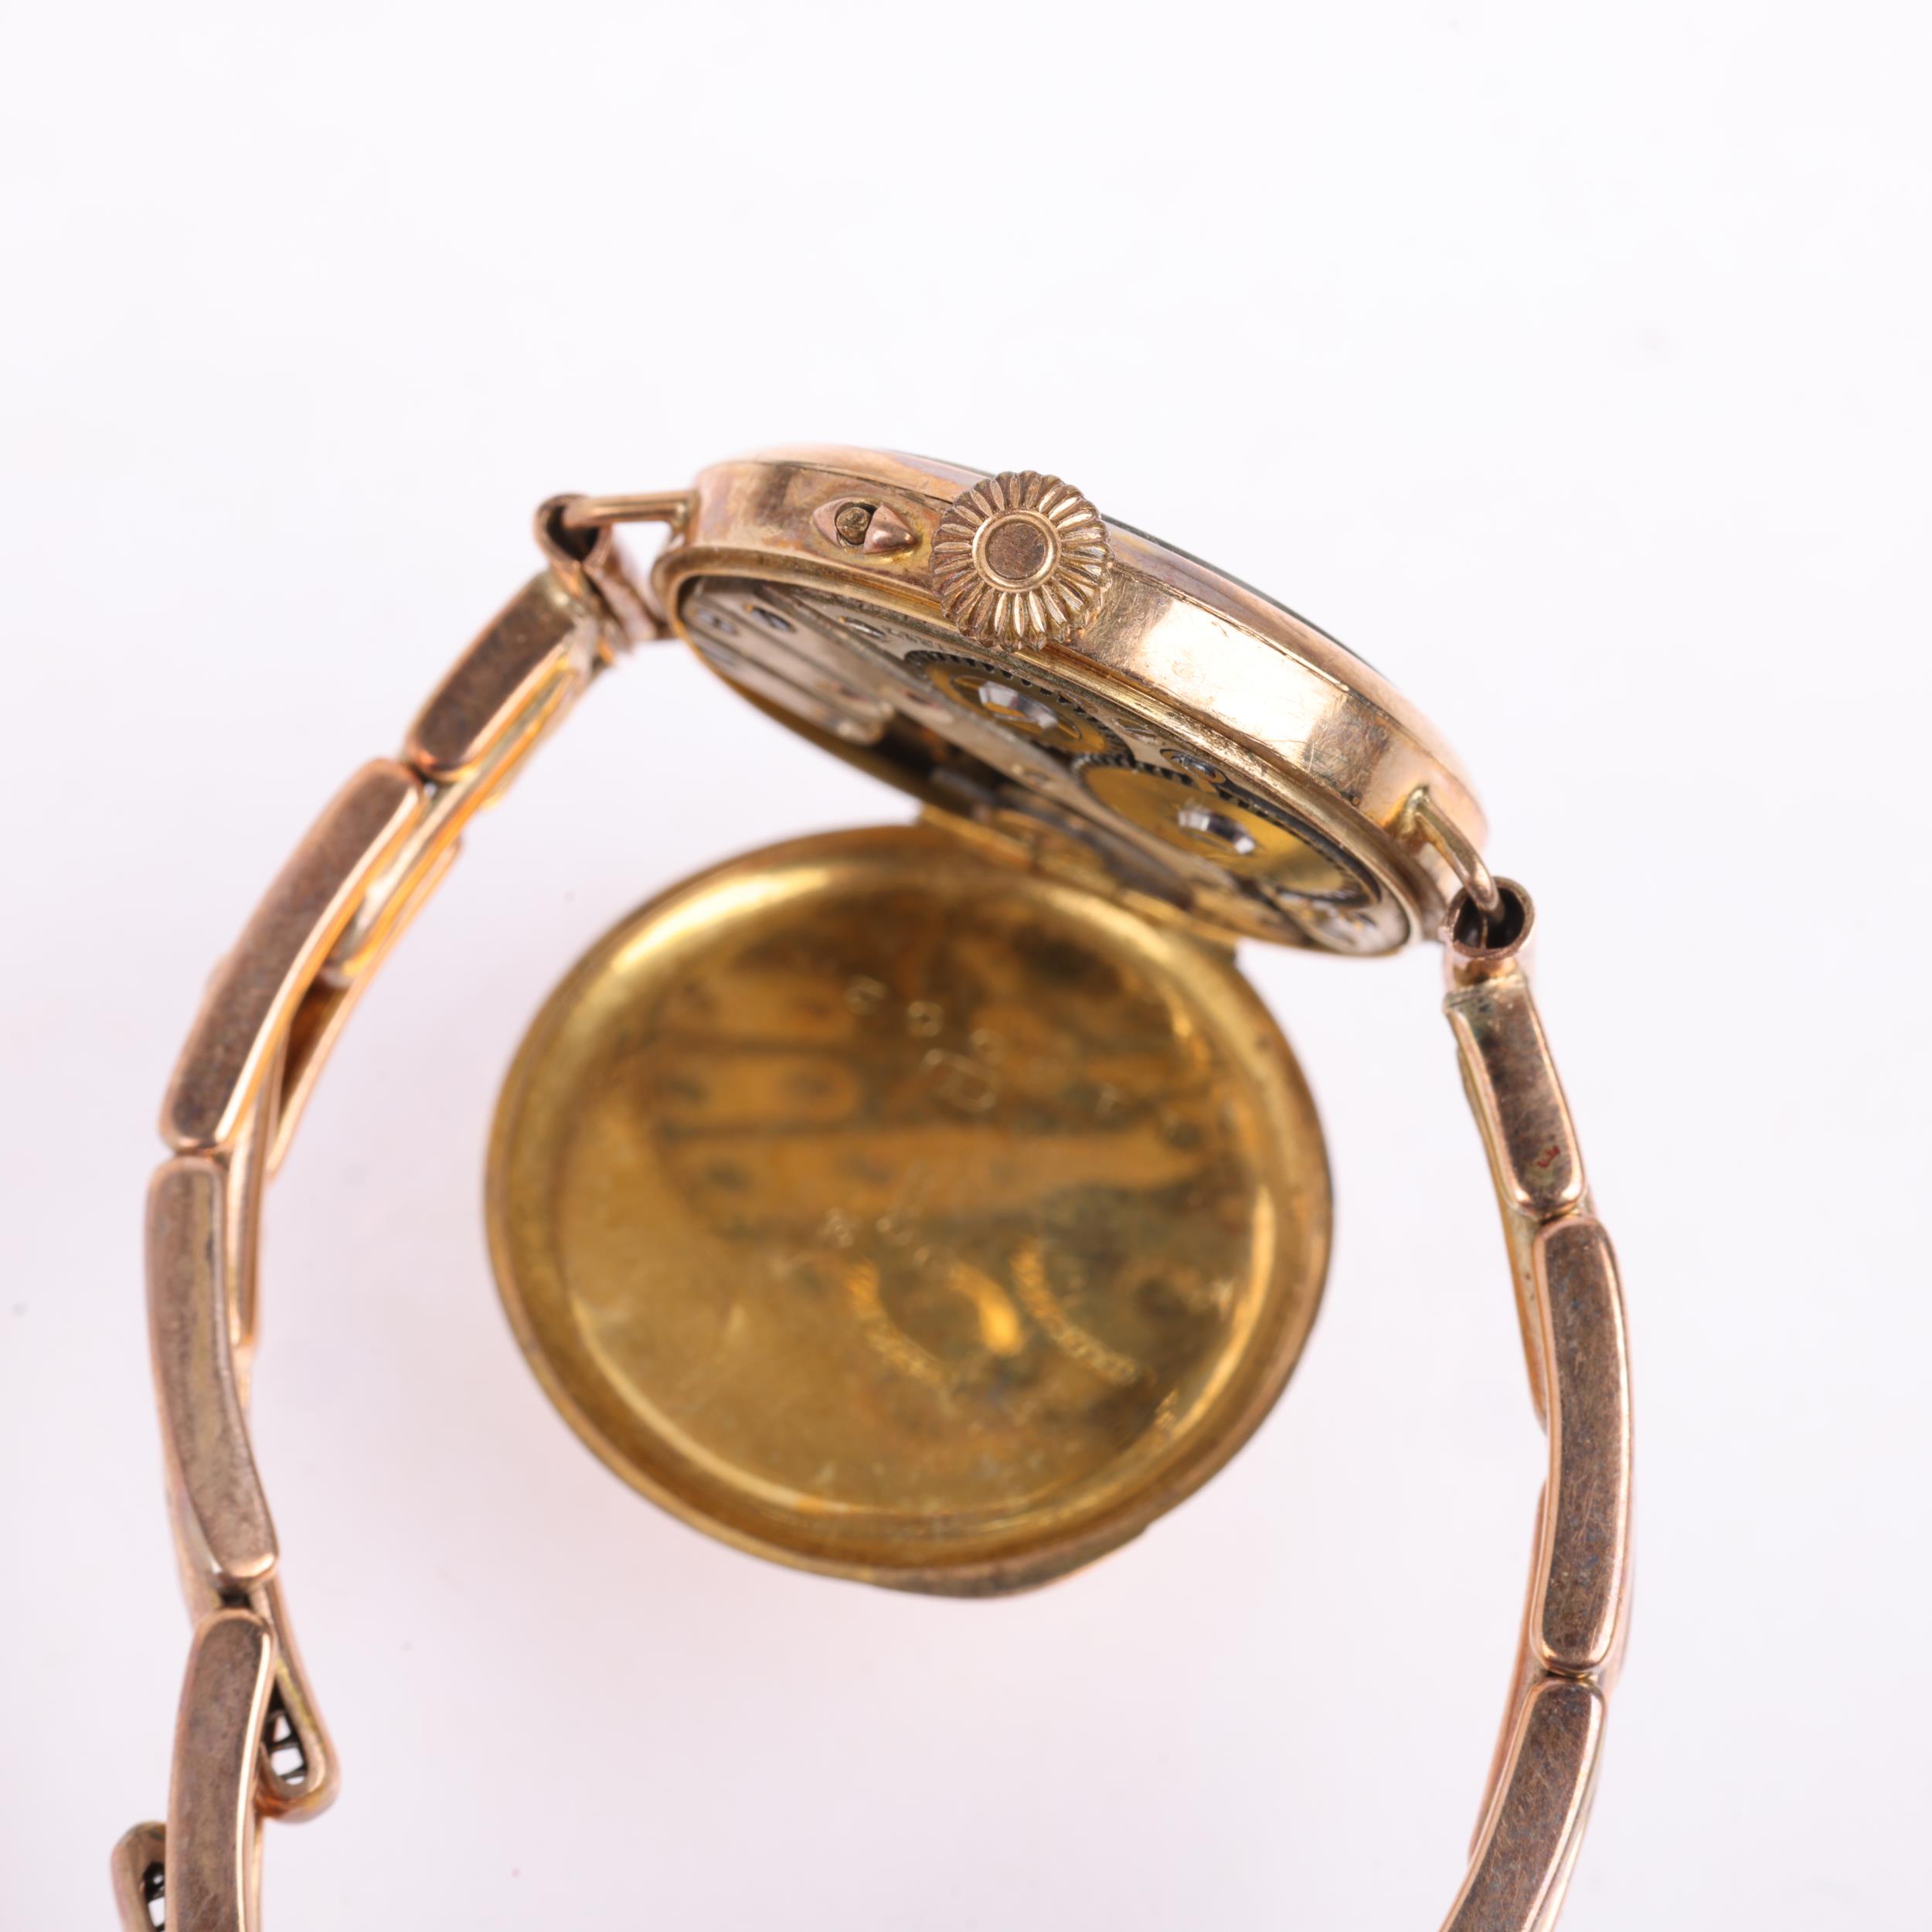 J W BENSON - an early 20th century 9ct rose gold mechanical bracelet watch, silvered dial with - Image 5 of 5